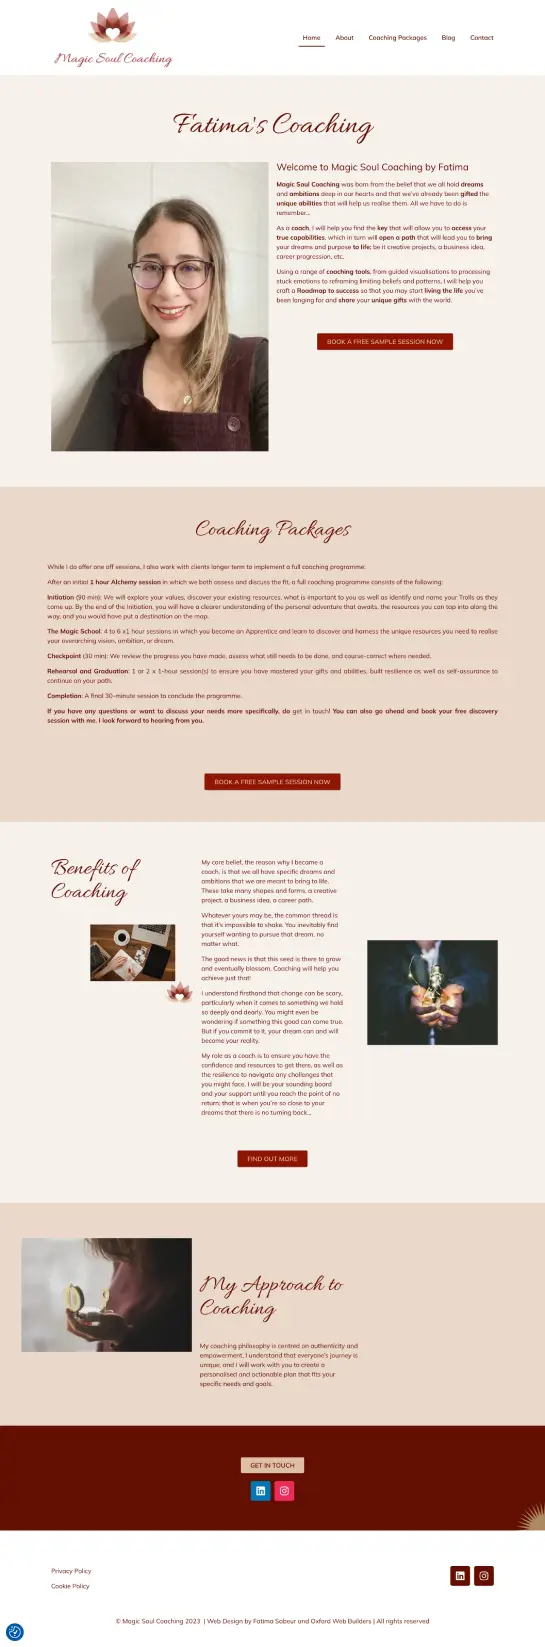 The homepage for the website for Magic Soul Coaching. The tones are neutral browns and deep red, with some gold thrown in.